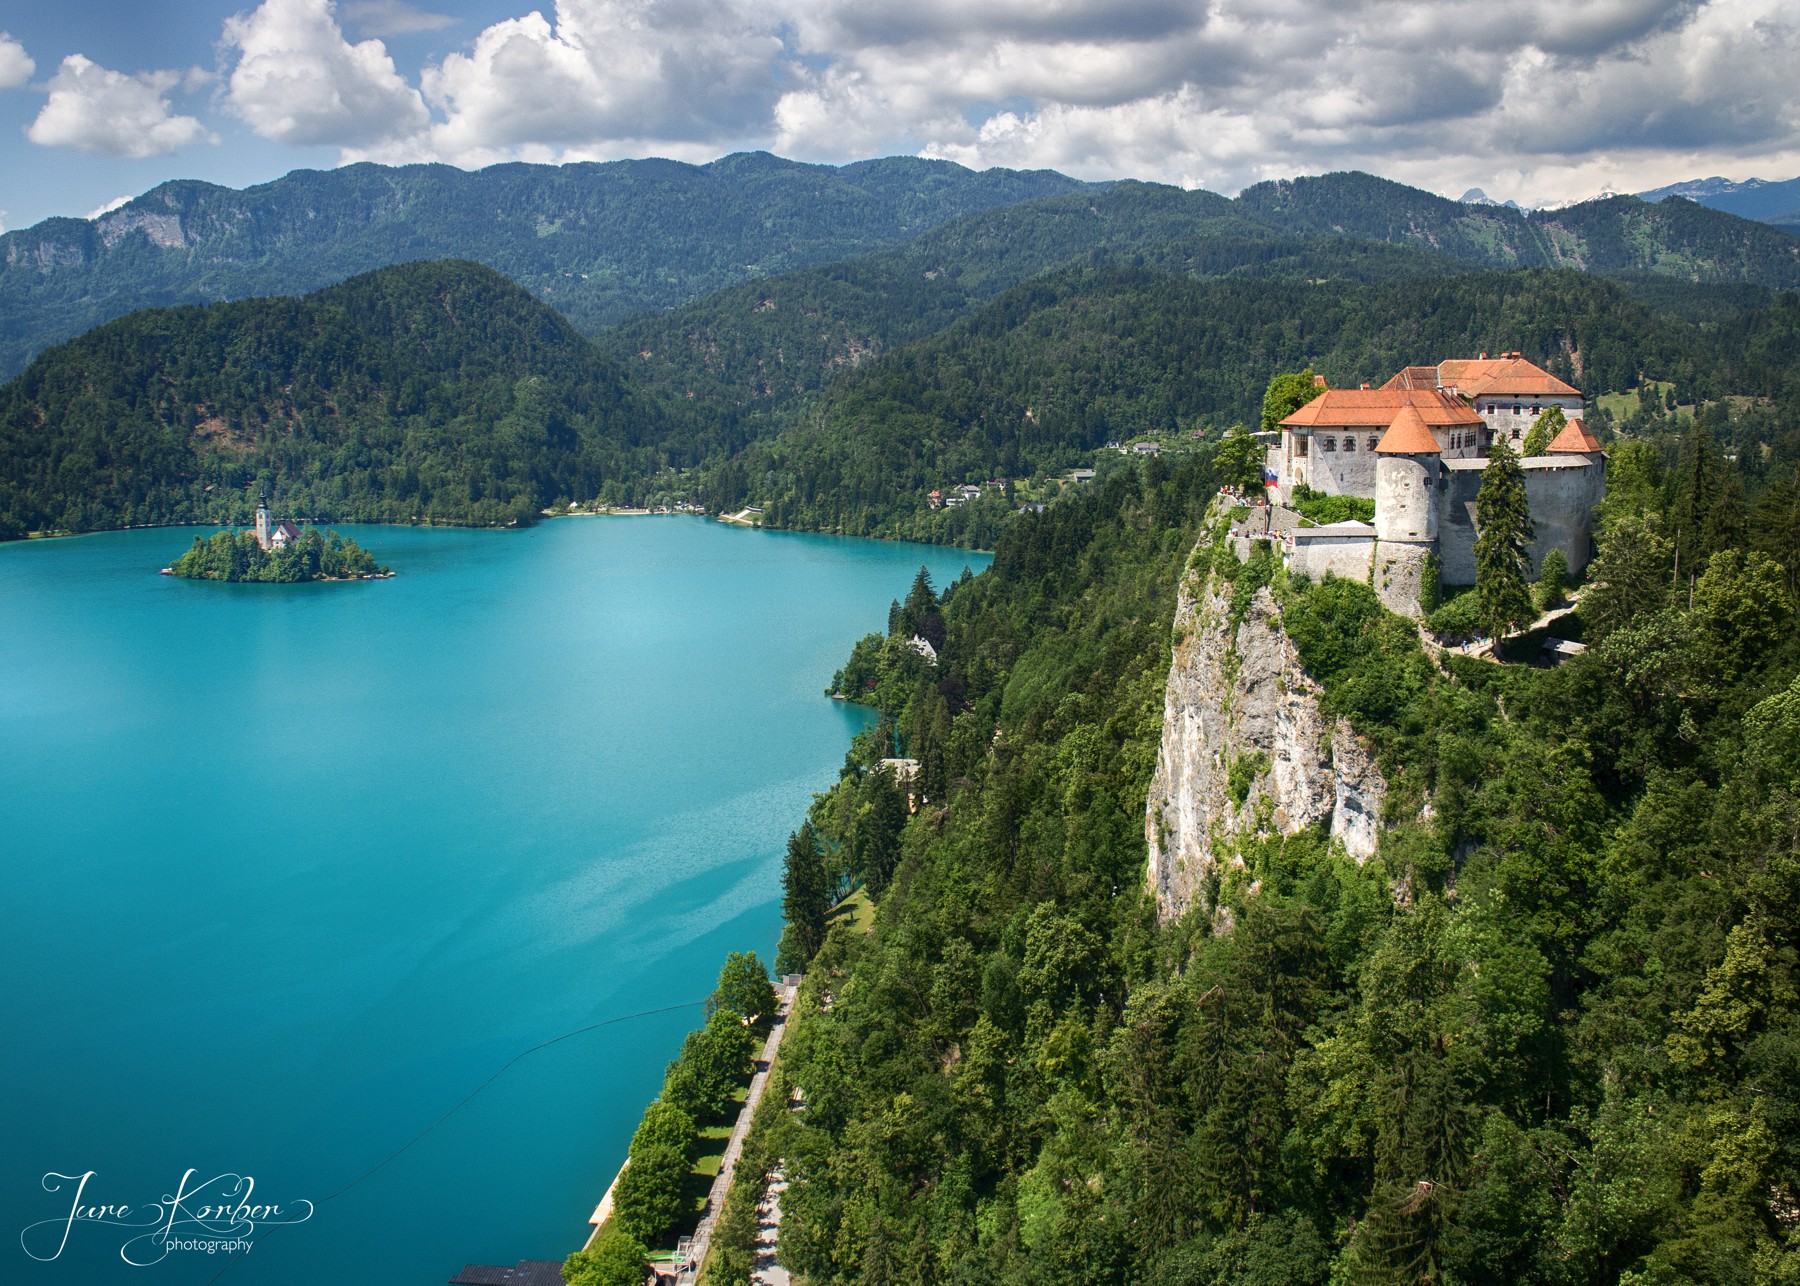 What language is spoken in slovenia?